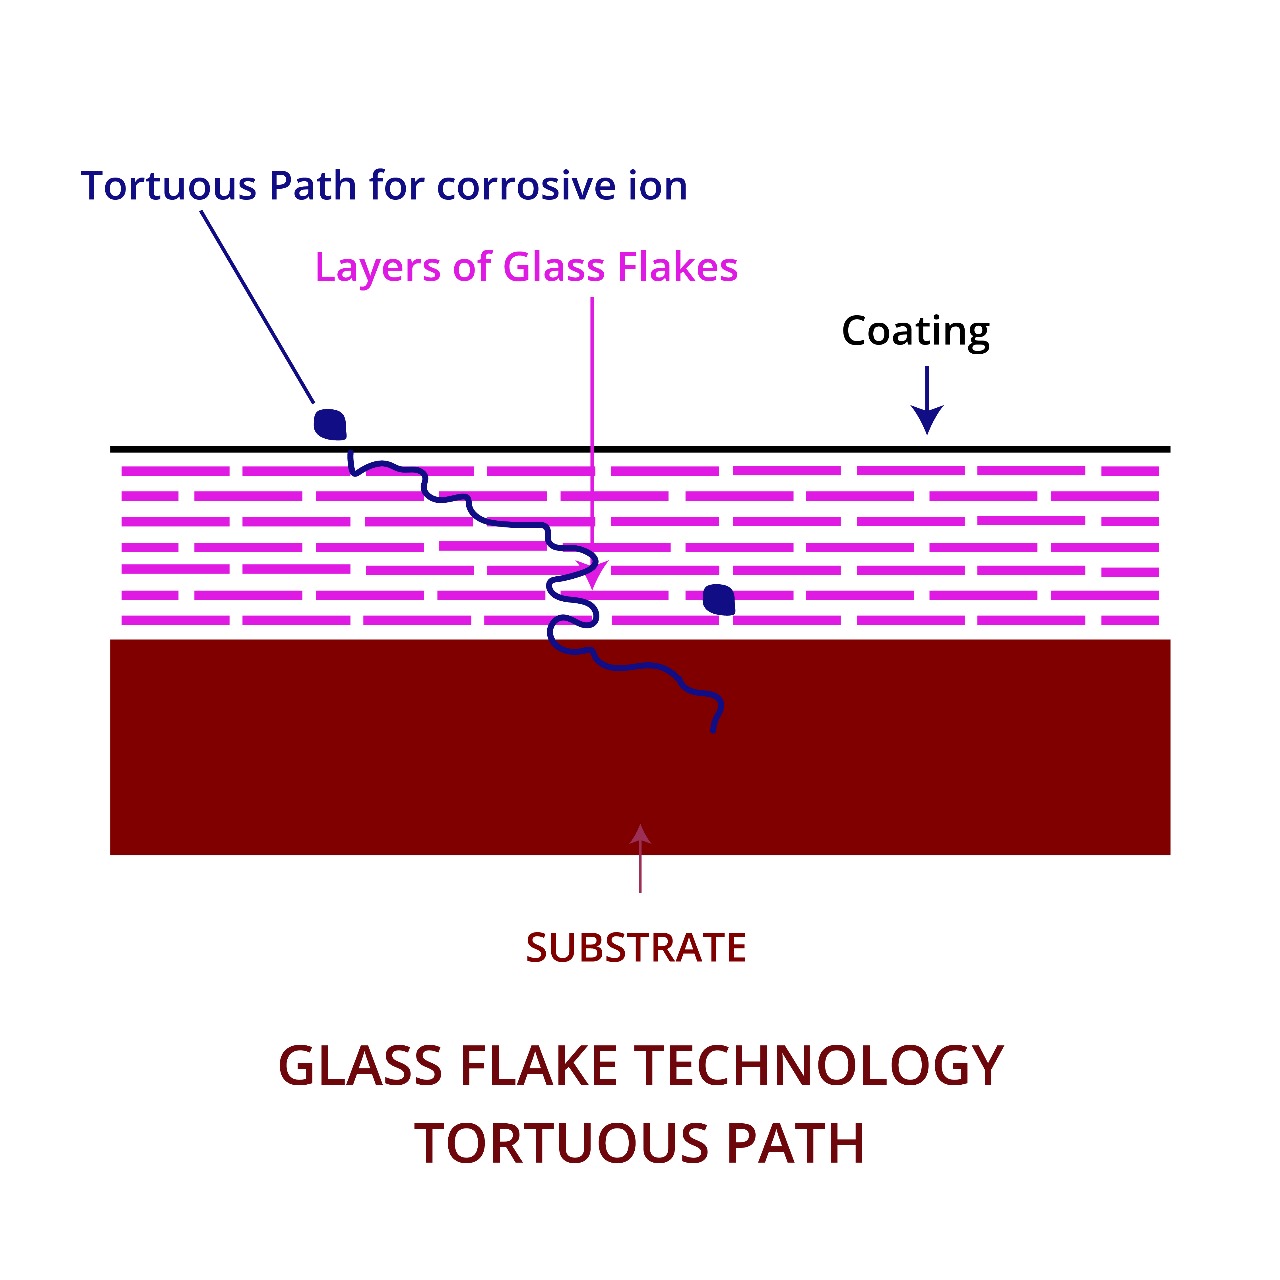 Glass flake technology - Tortuous Path